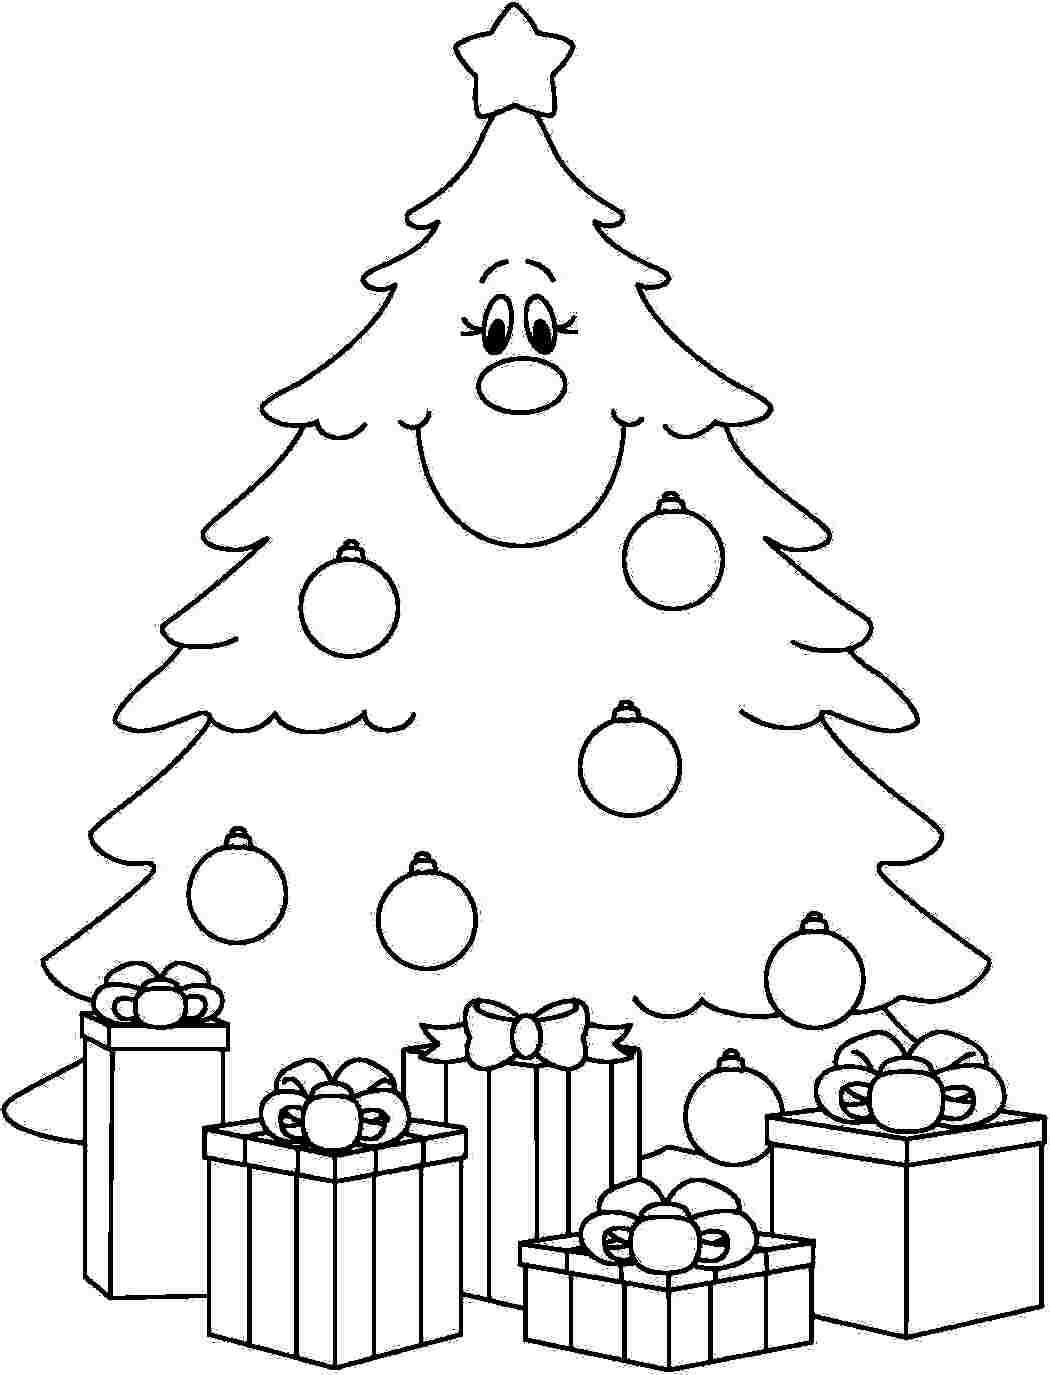 Christmas Tree Coloring Pages For Kids
 Under the Christmas Tree EIT Digital